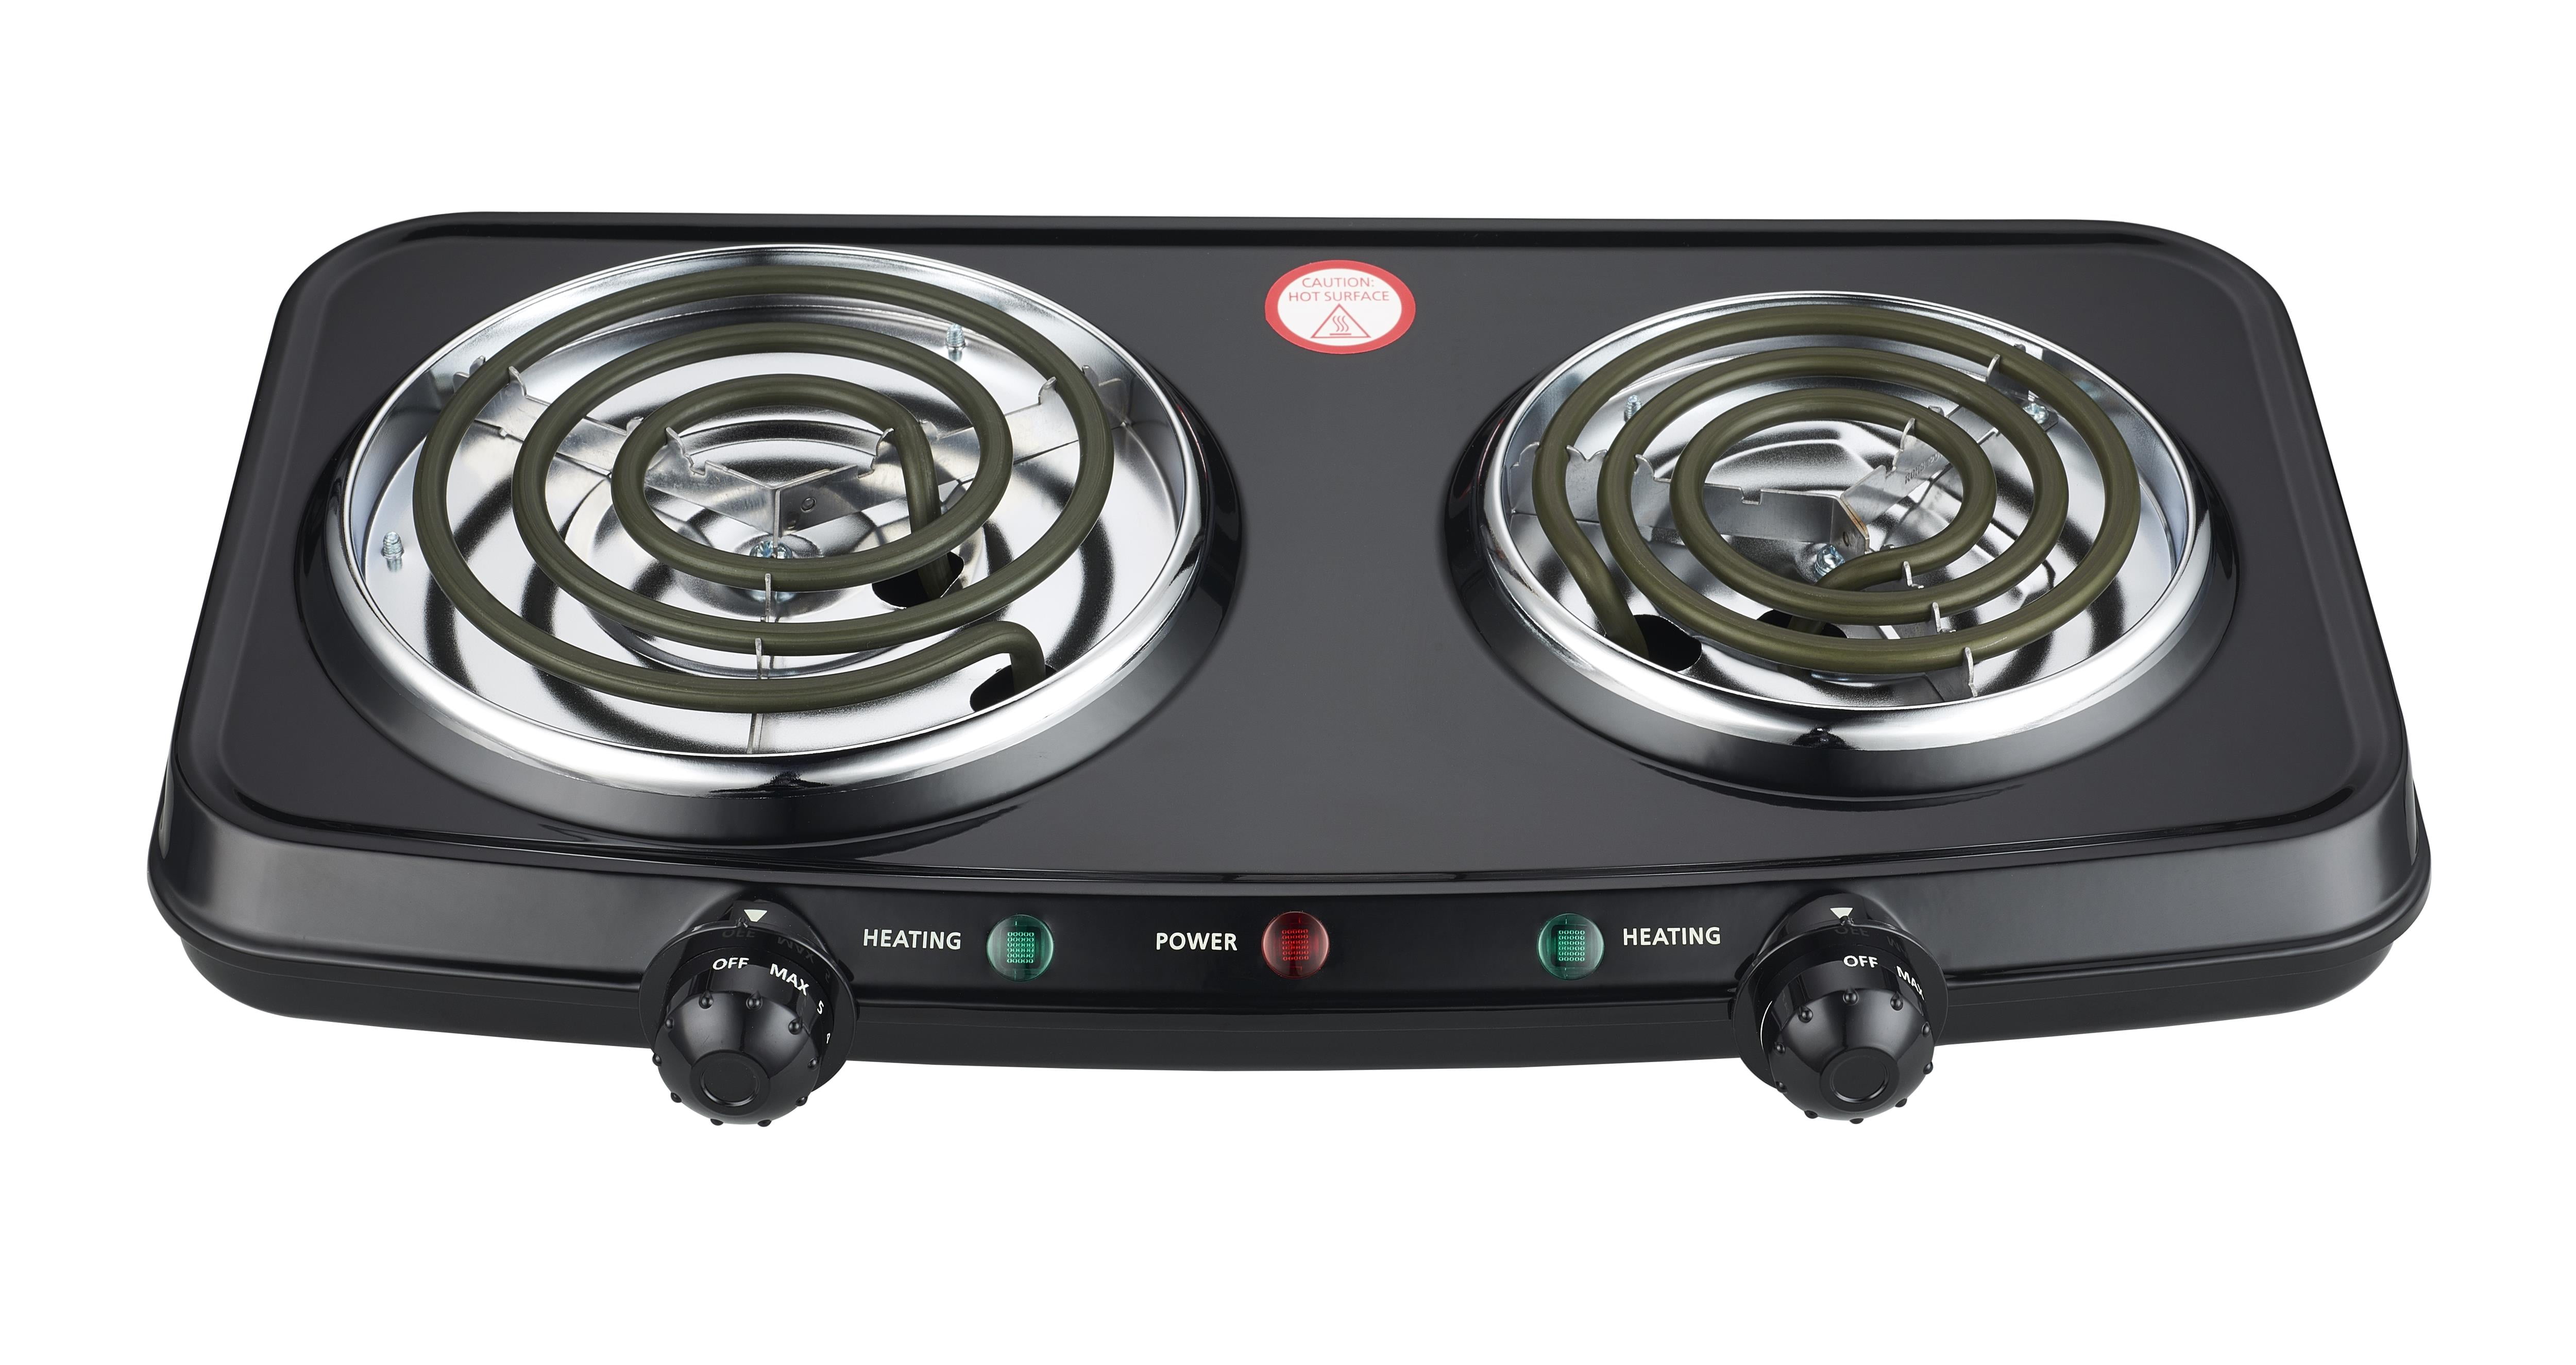 Portable Small Electric Stove Top 2 Burners Range Double Hot Plate